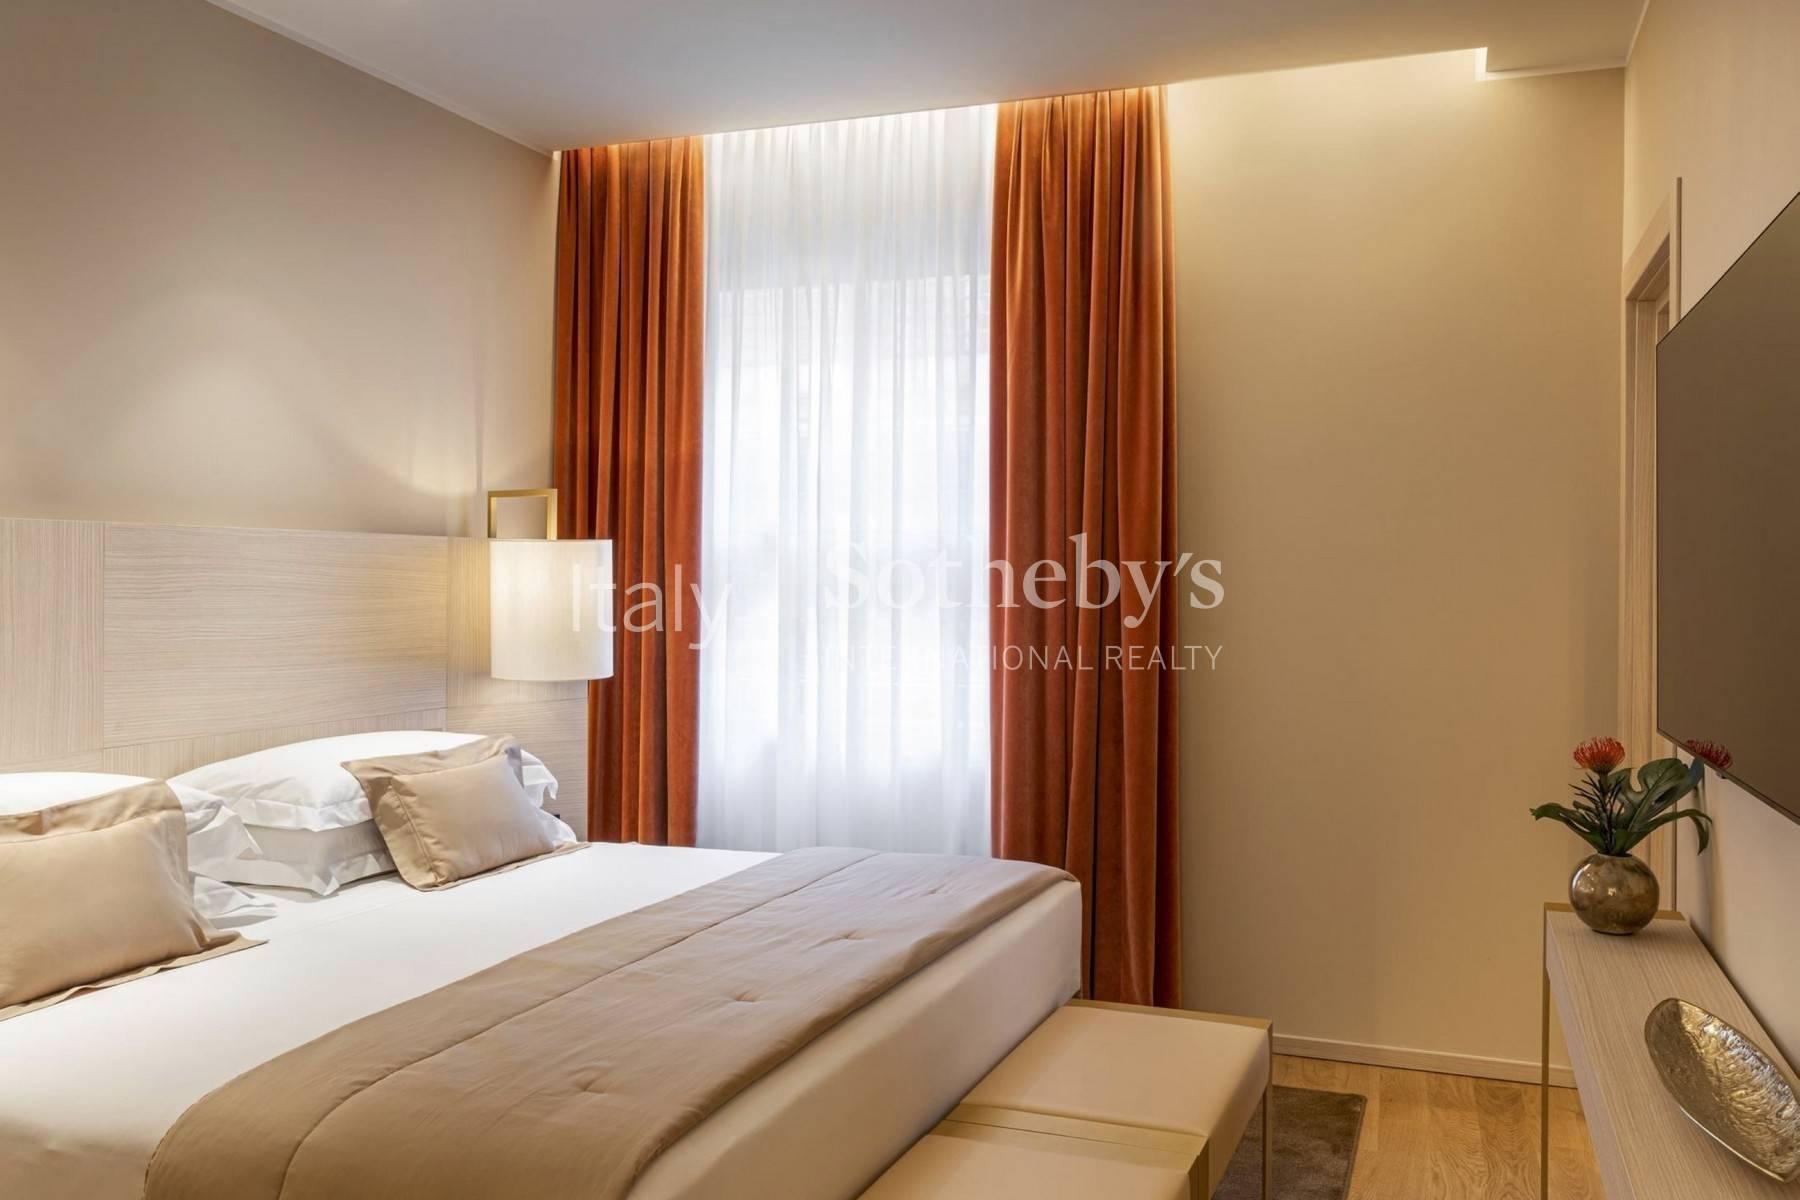 Apartments of various sizes in luxury hotel close to Piazza Duomo - 8